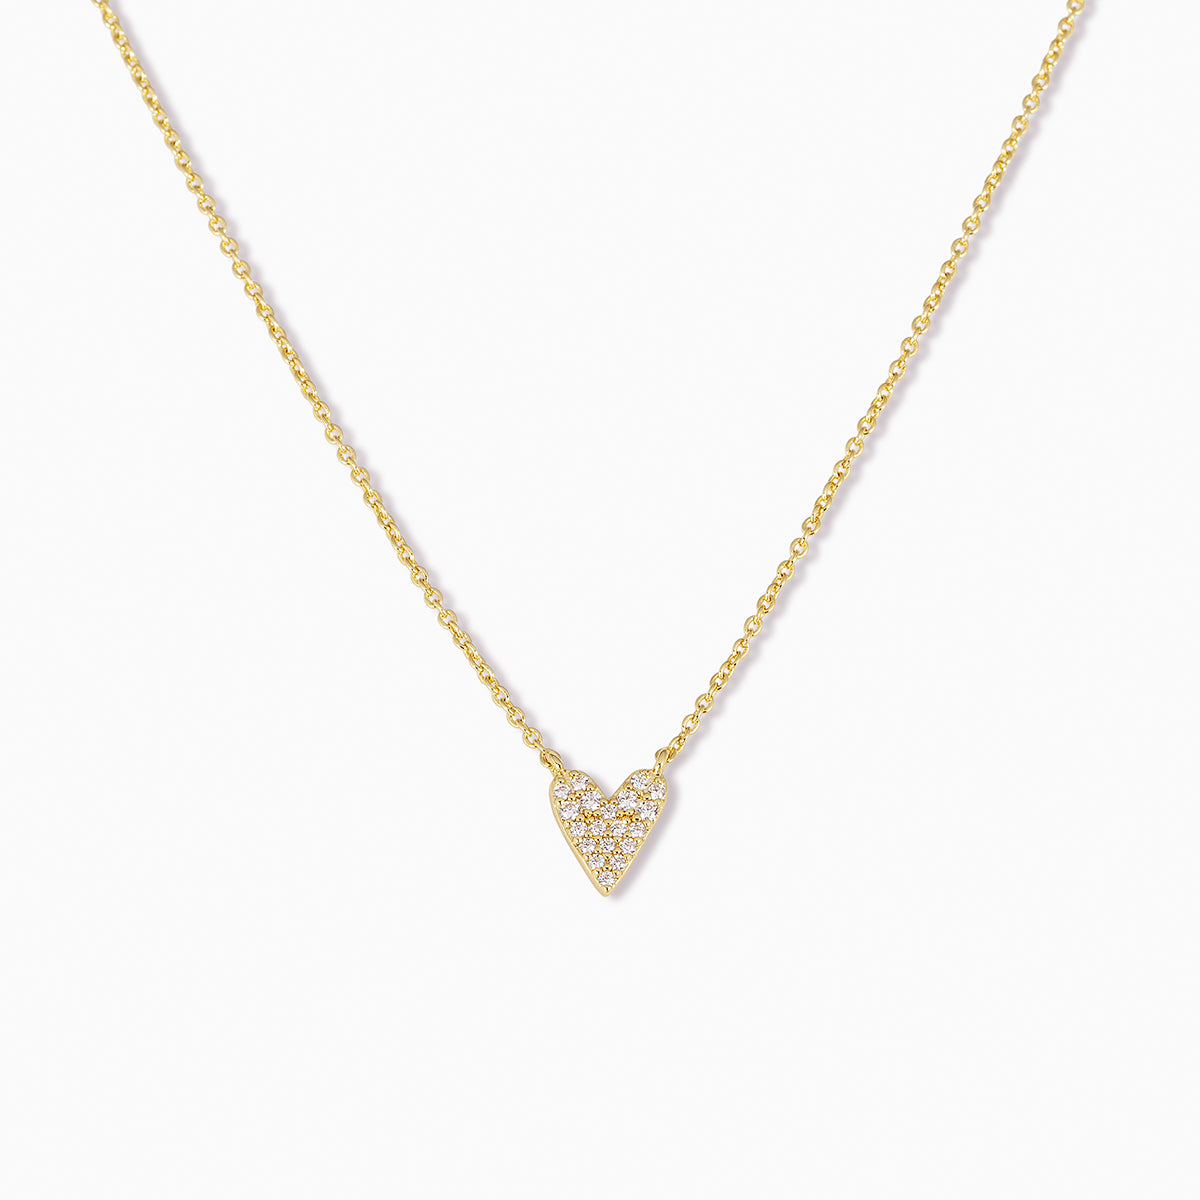 Full Heart Necklace | Gold | Product Image | Uncommon James